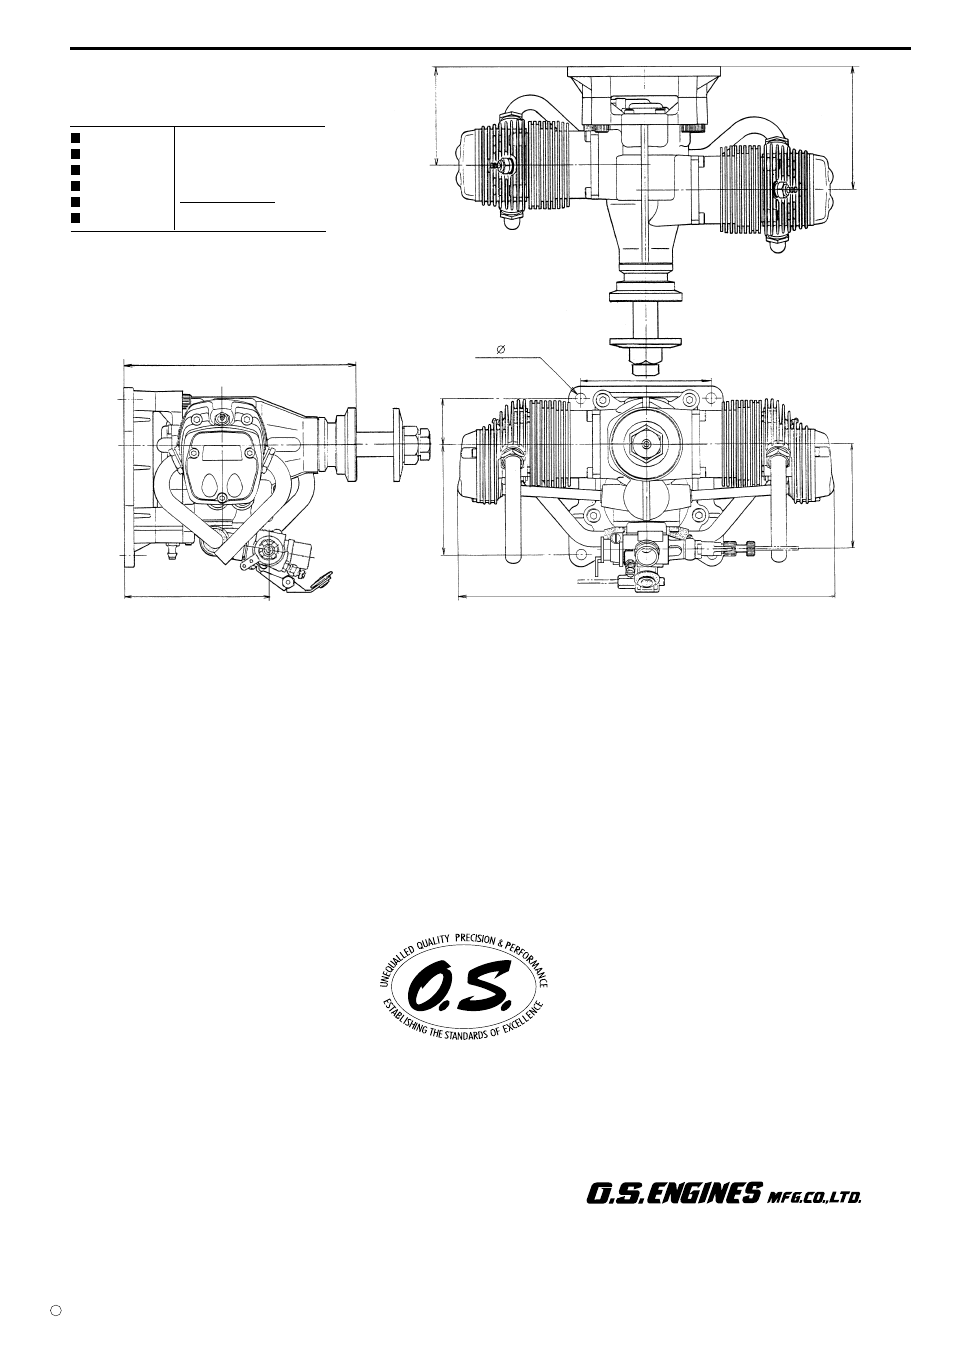 Three view drawing | O.S. Engines FT-160 Gemini User Manual | Page 17 / 17